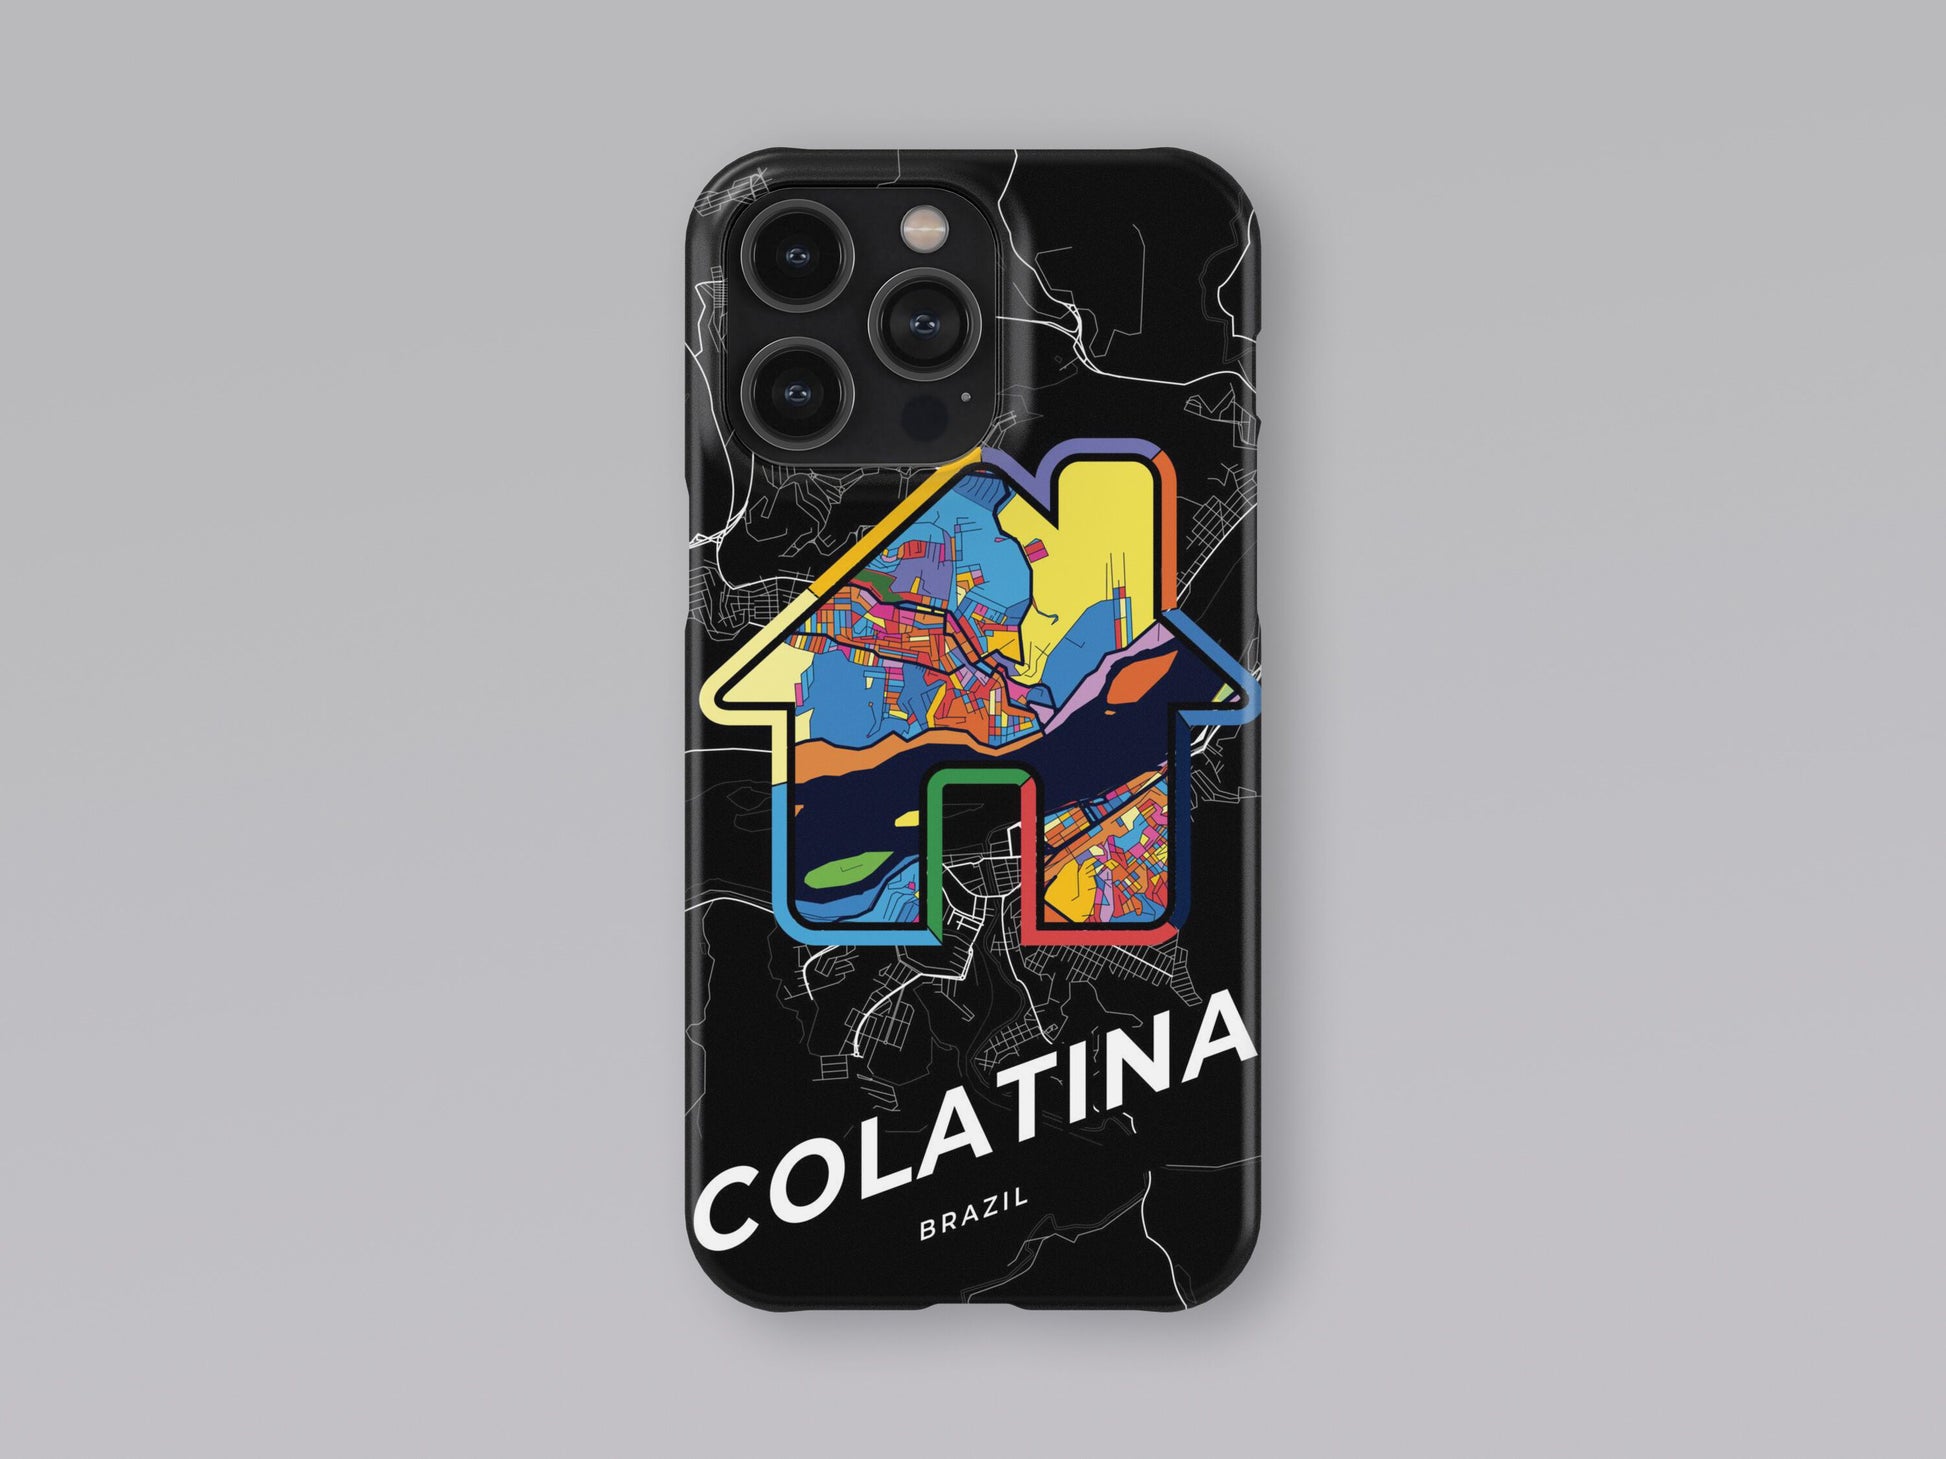 Colatina Brazil slim phone case with colorful icon. Birthday, wedding or housewarming gift. Couple match cases. 3